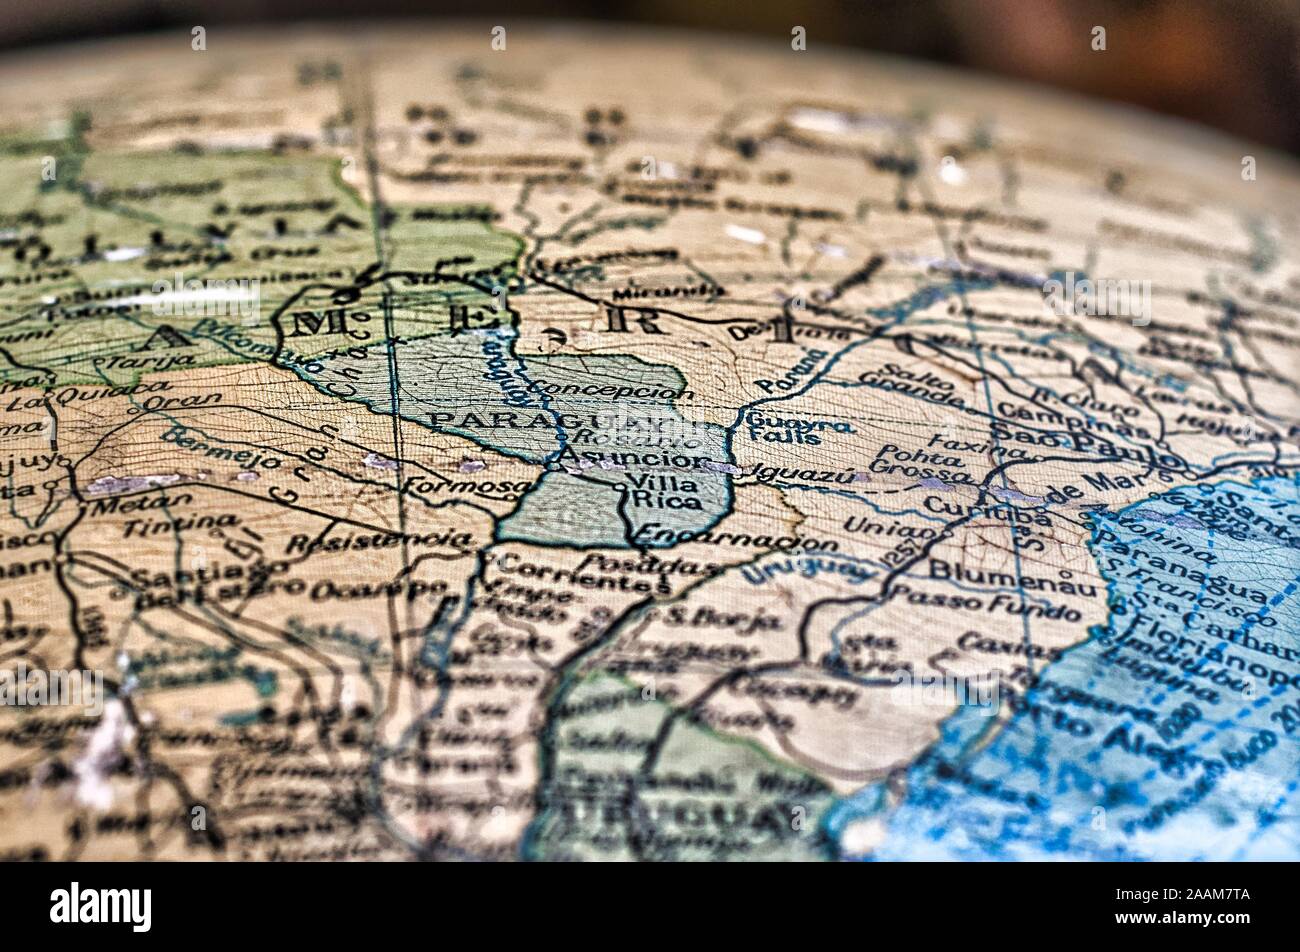 An old may of Paraguay on an antique globe Stock Photo